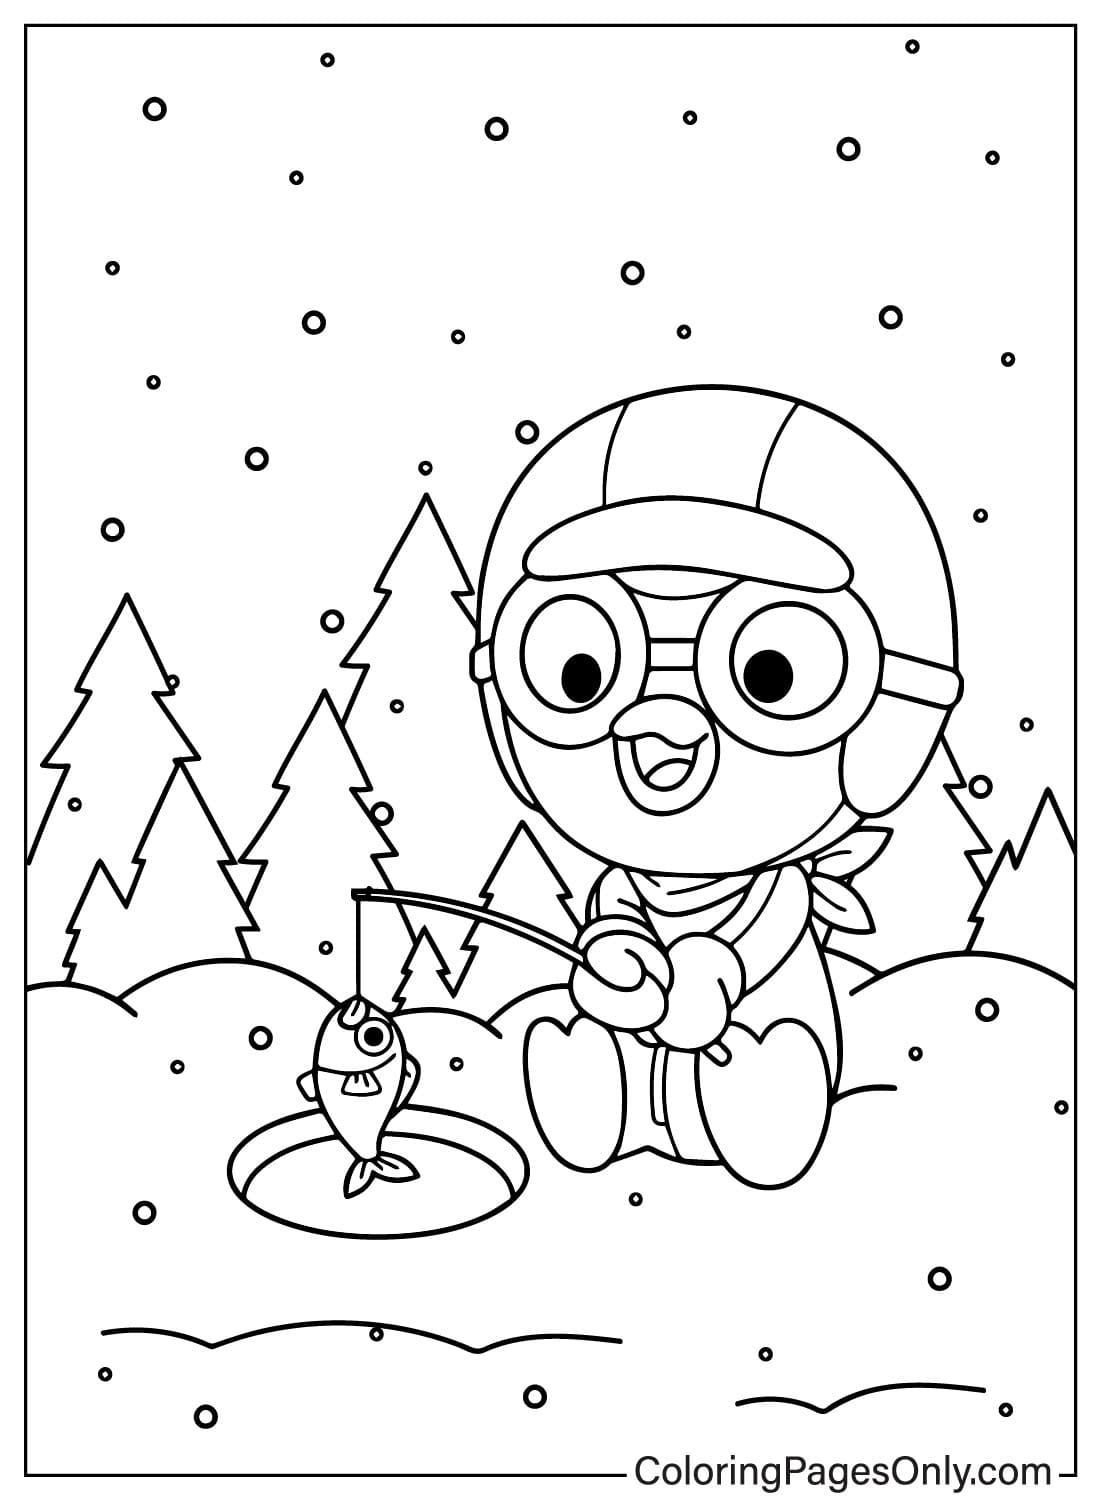 Free Pororo Coloring Page from Pororo the Little Penguin